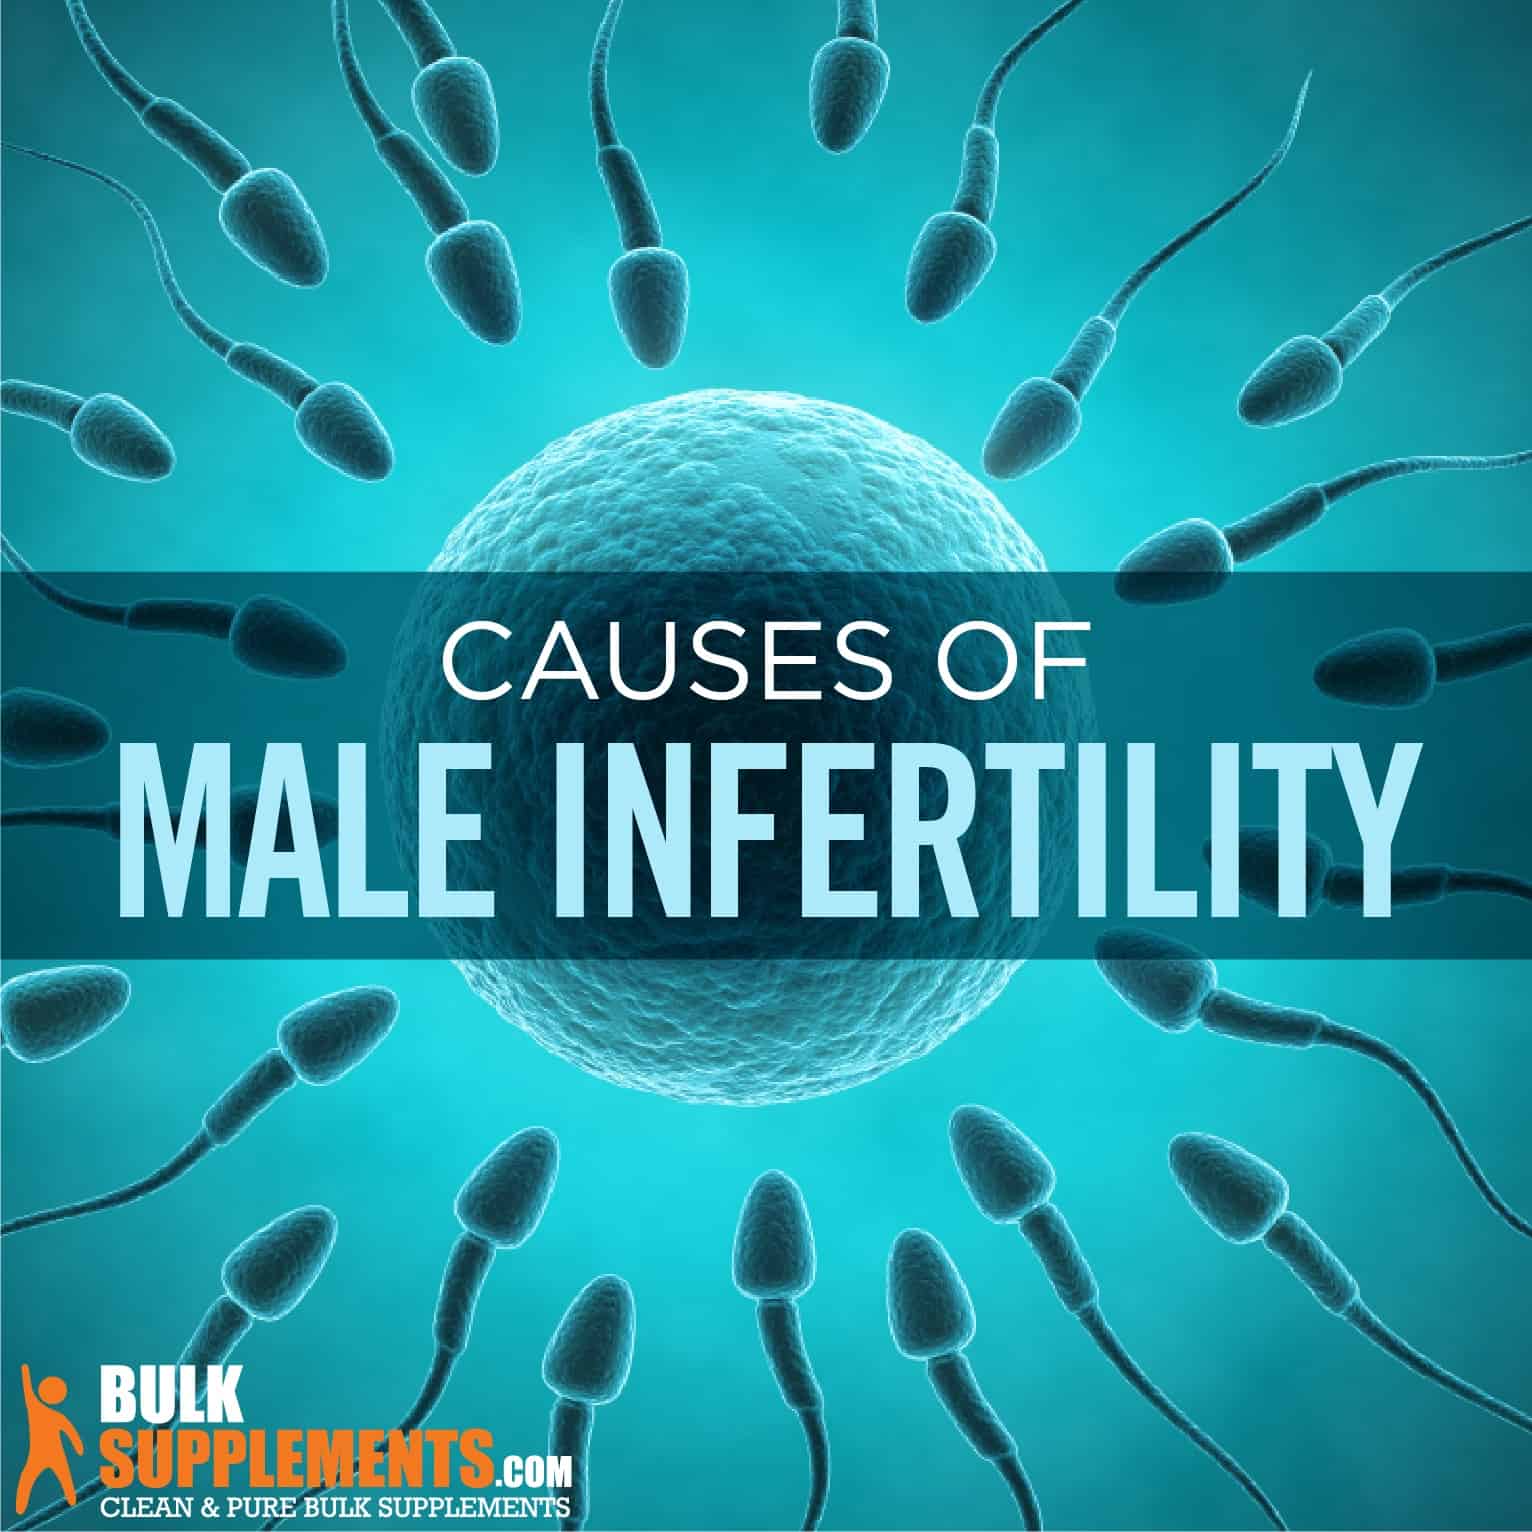 Male Infertility: Signs, Causes & Treatment by James Denlinger